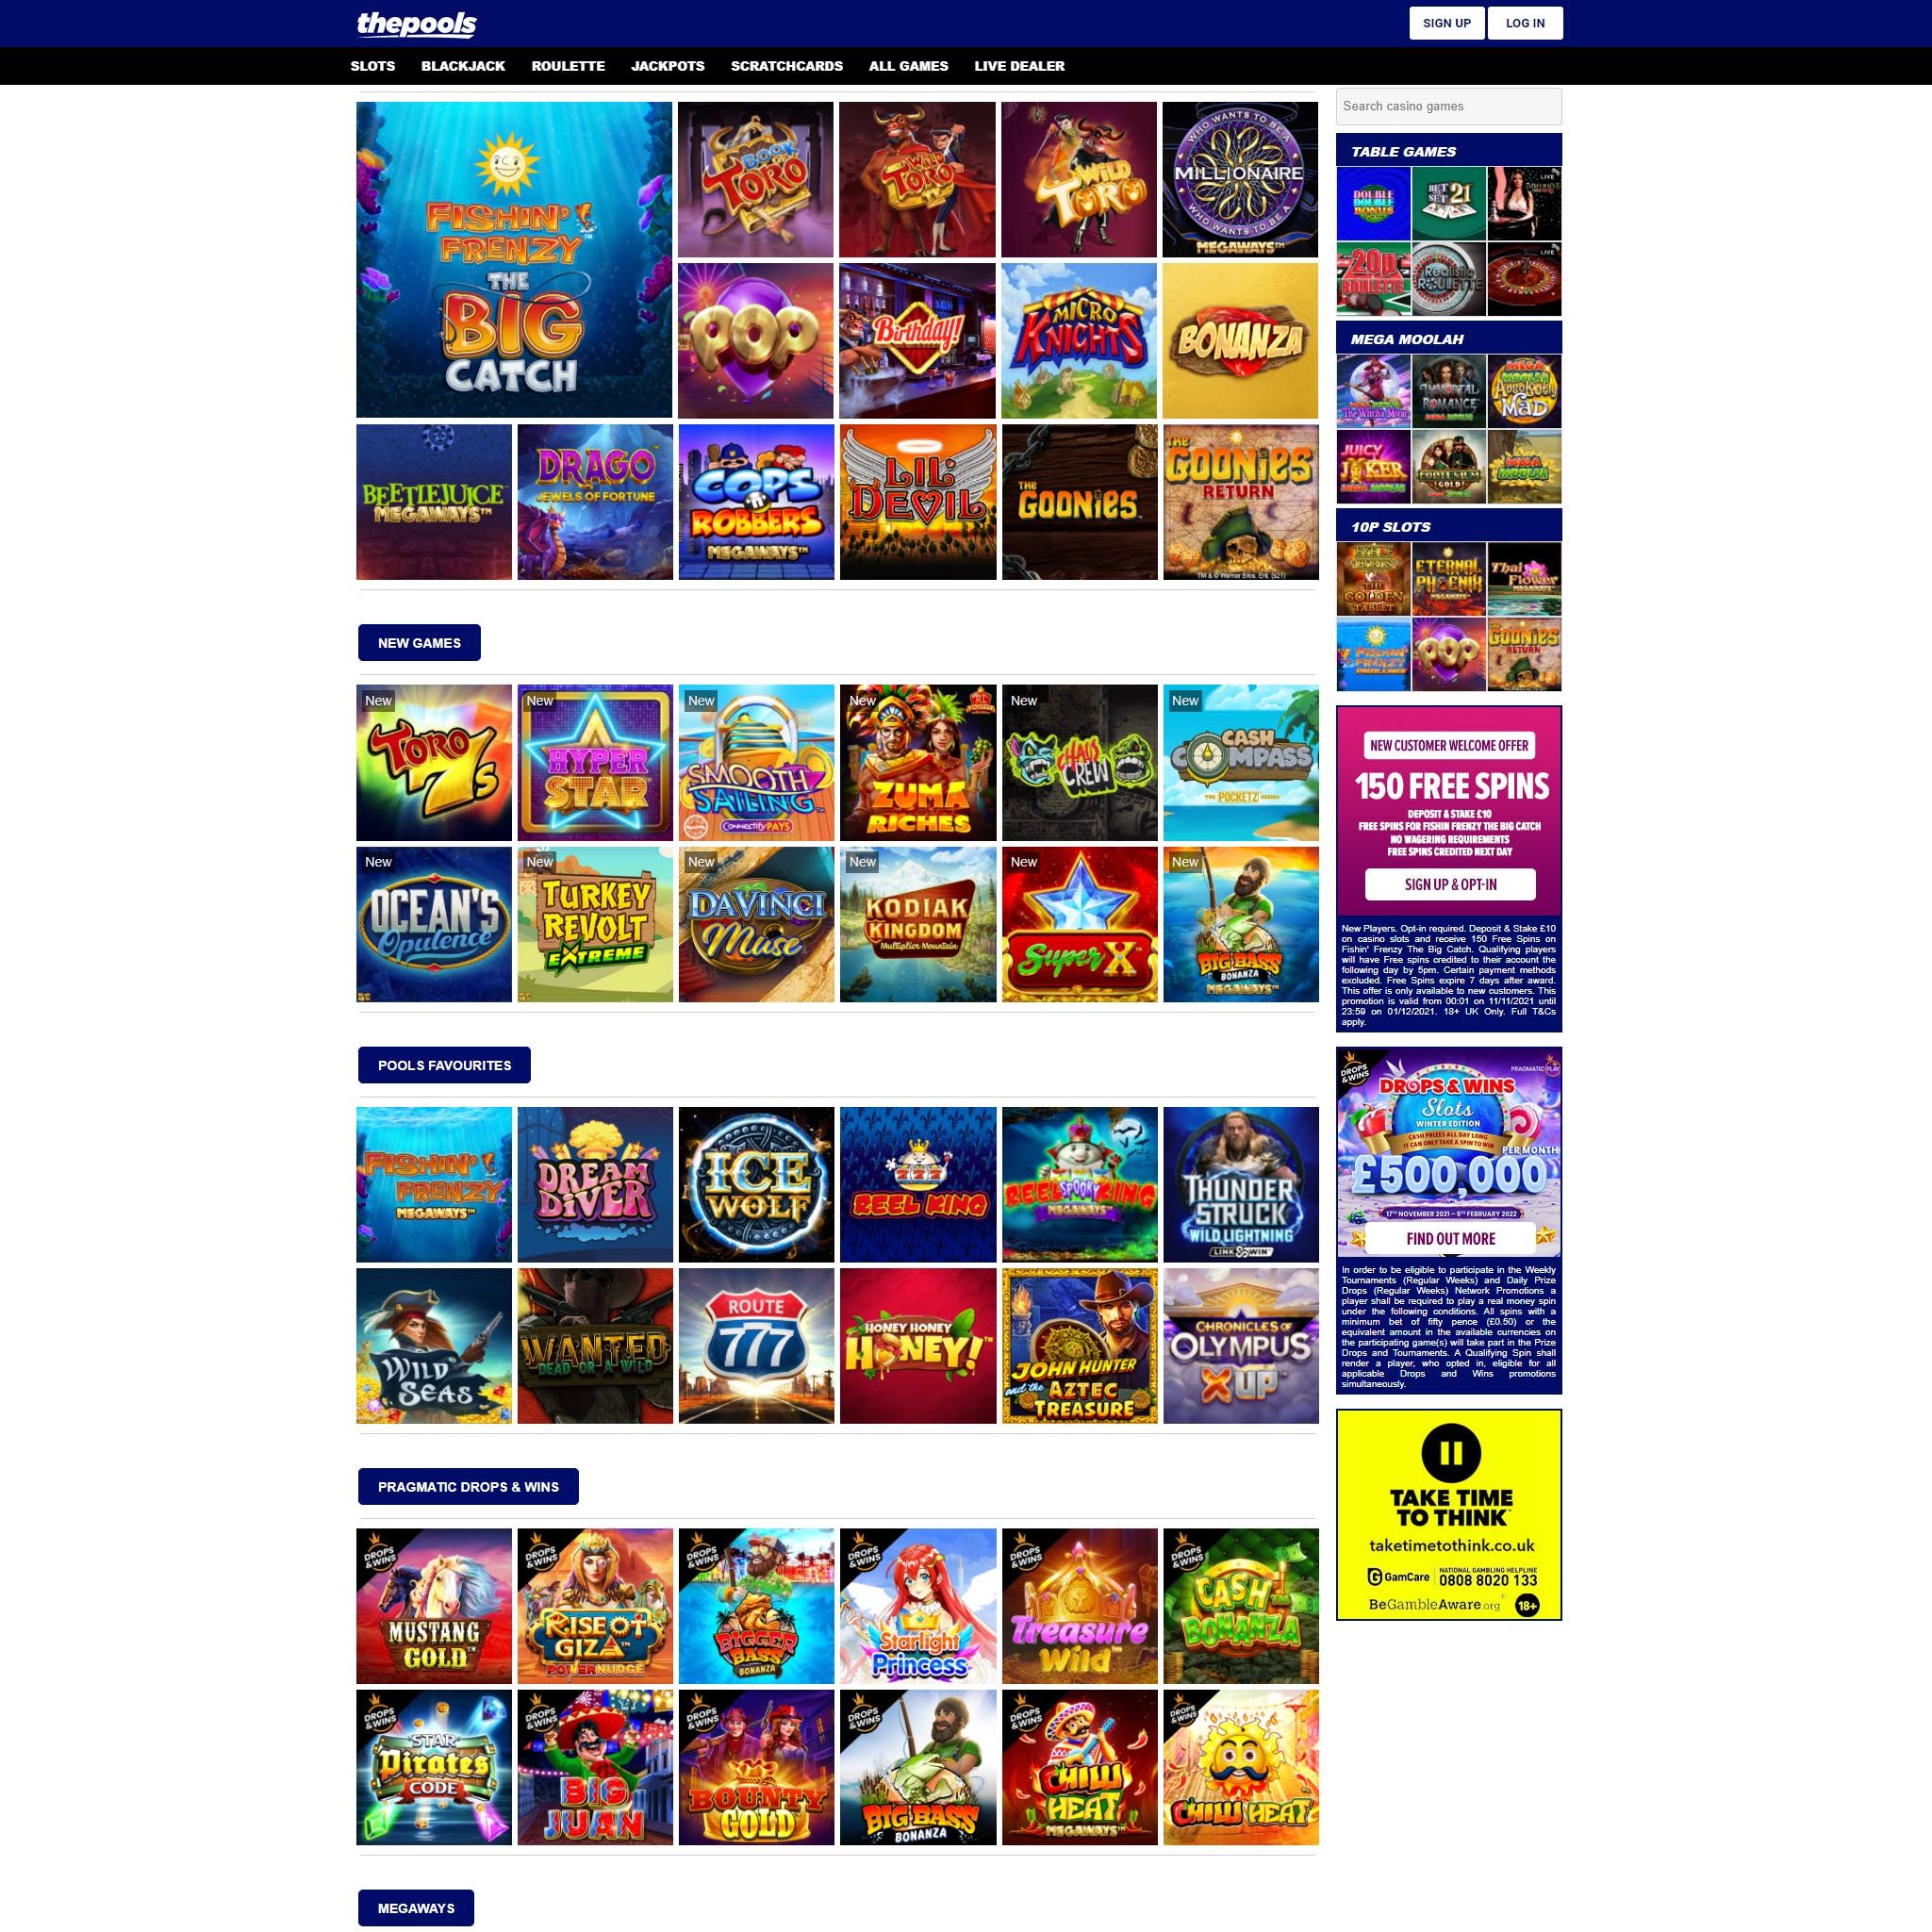 The Pools Casino game catalogue